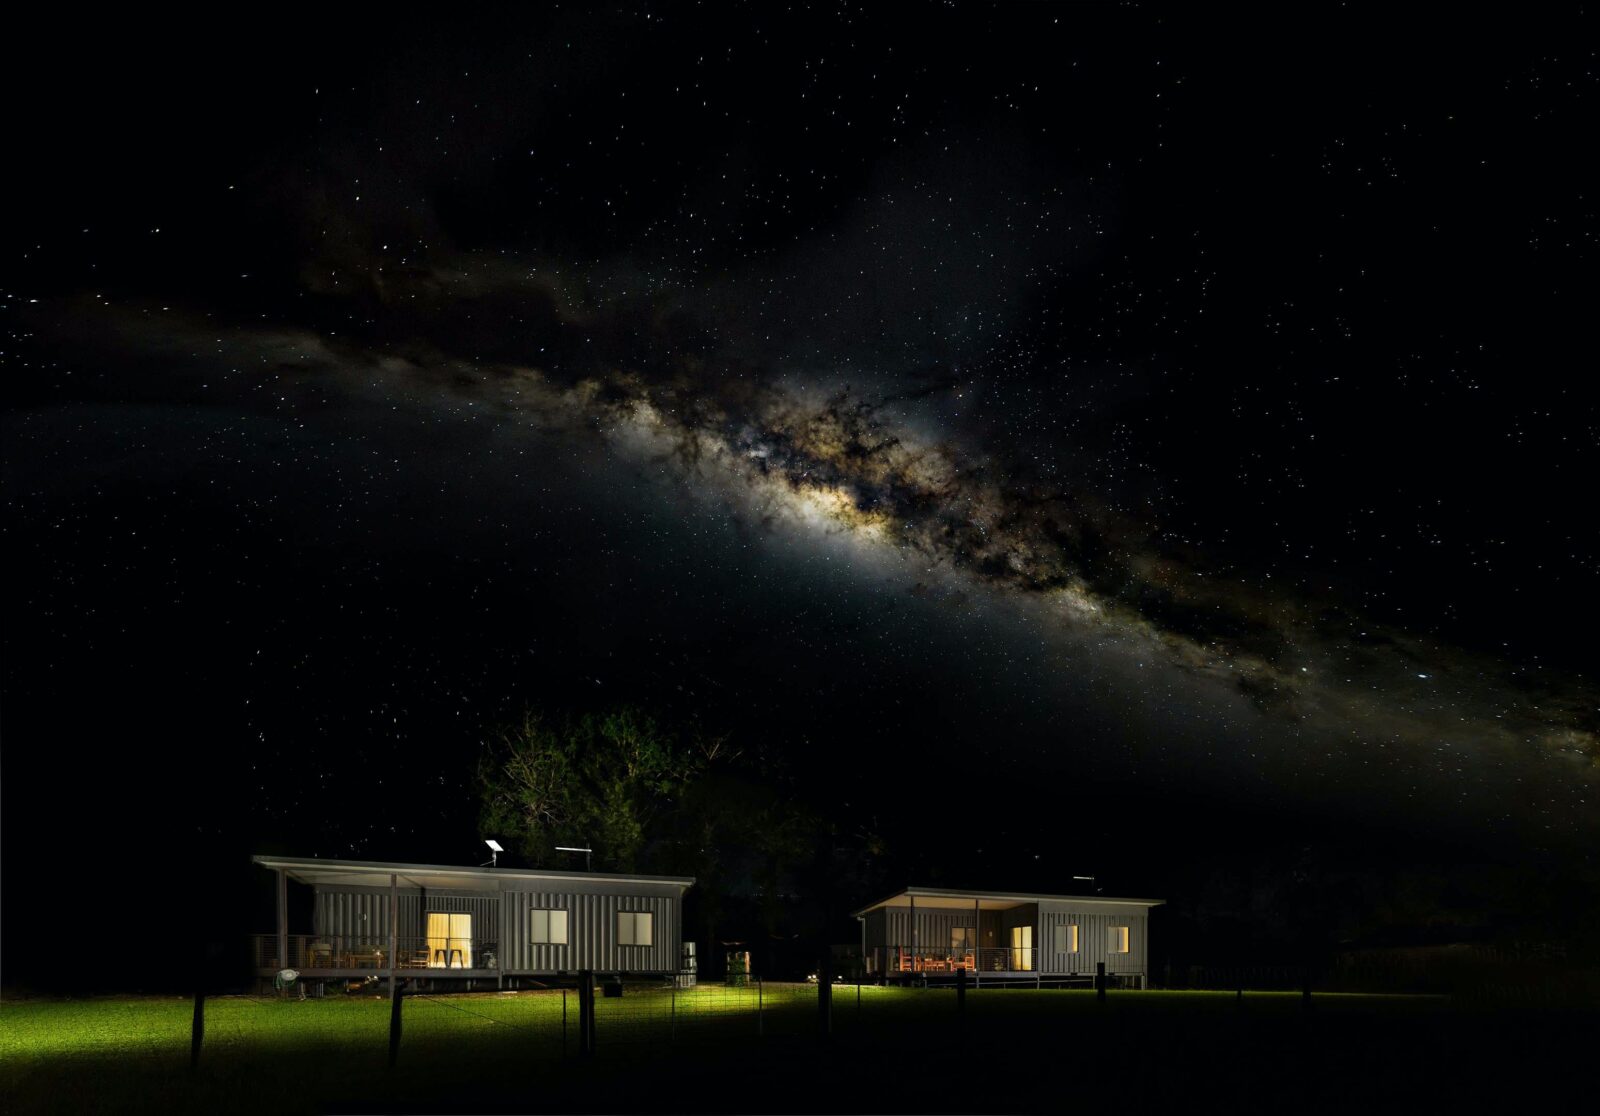 An image of both cottages sitting in a paddock at night with the Milky Way arching over the top.